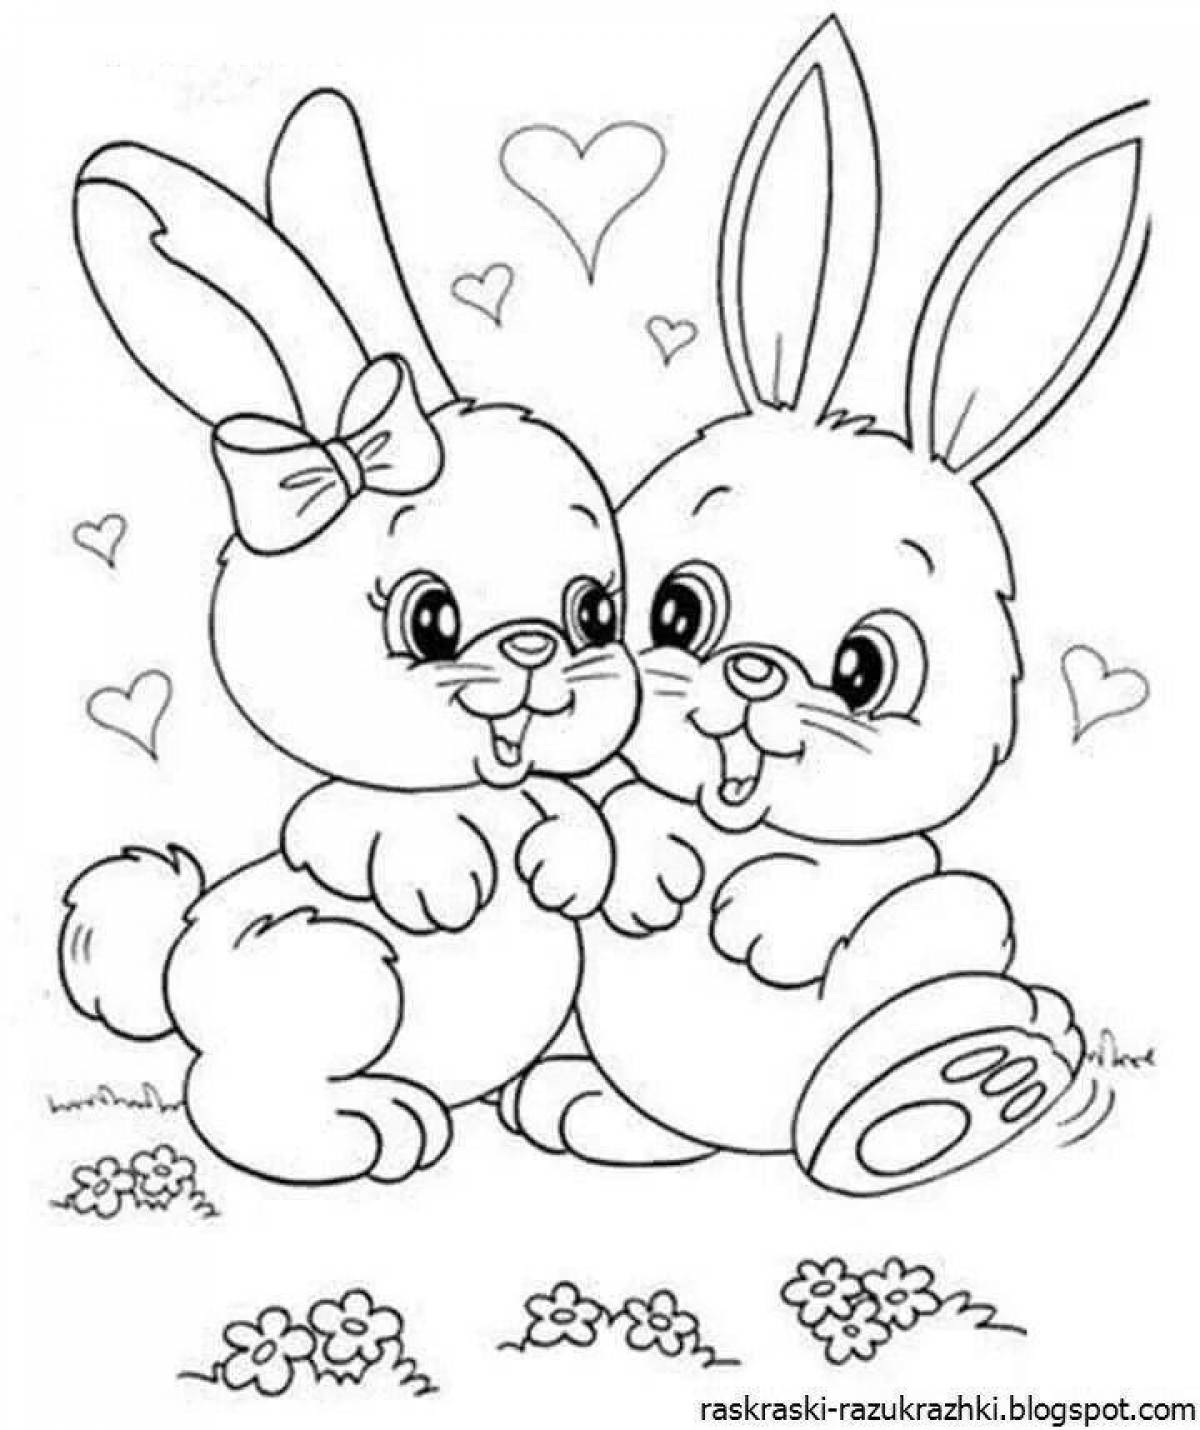 Dazzling coloring page rabbit drawing